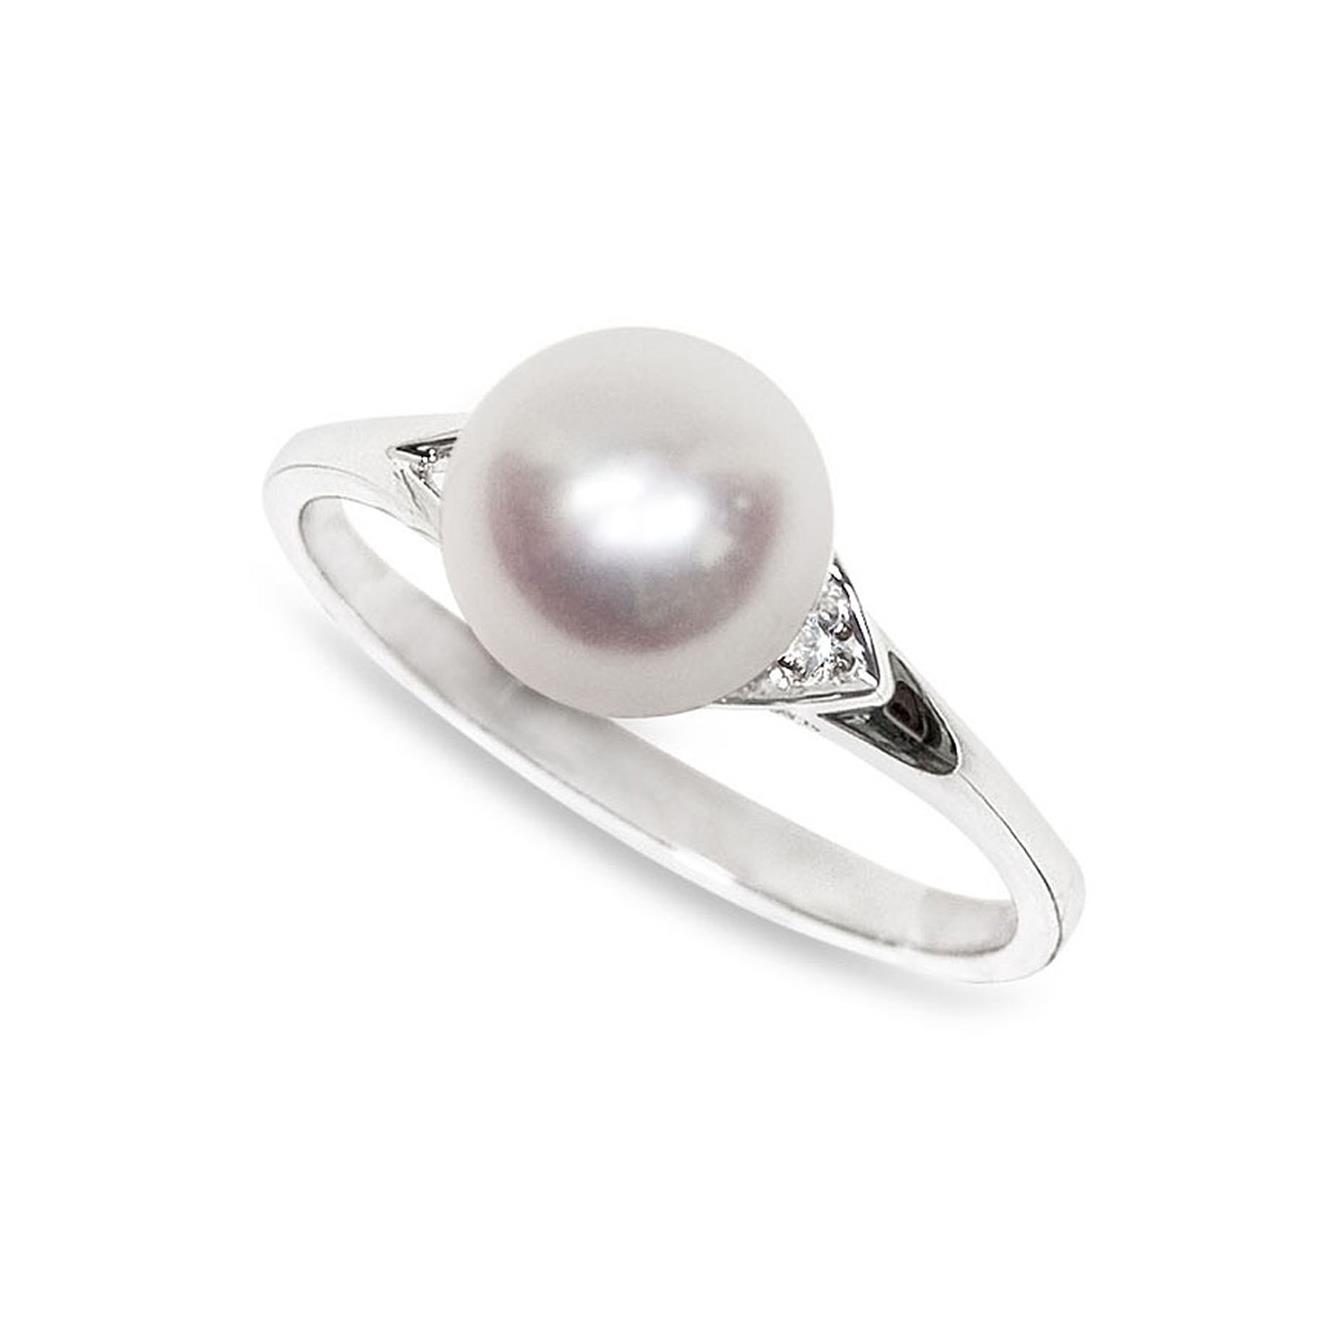 18kt white gold ring with full pearlescent pearl and diamonds - MAYUMI